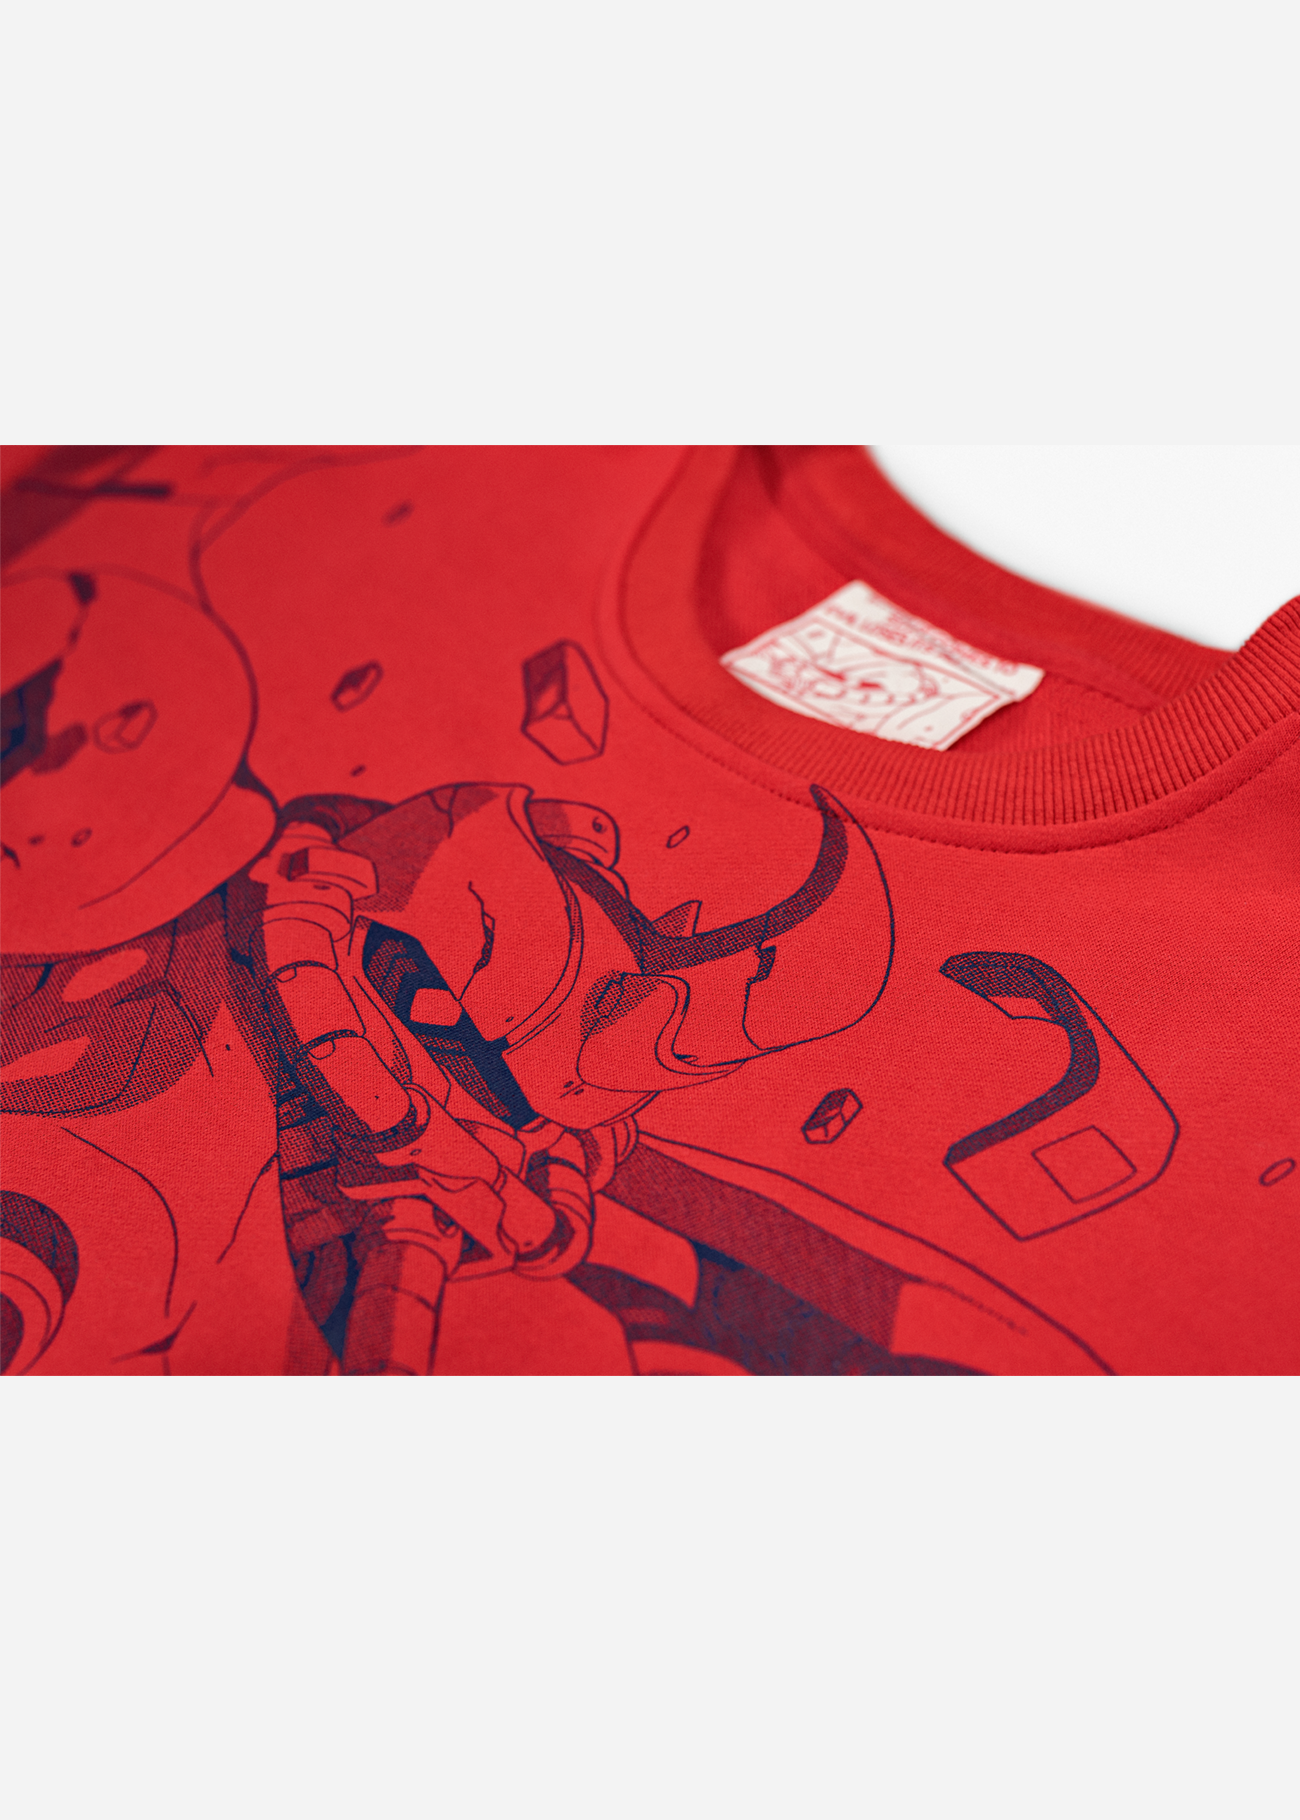 Close up photo of Red sweater with a mecha anime design on the front in screen print, inspired anime clothing